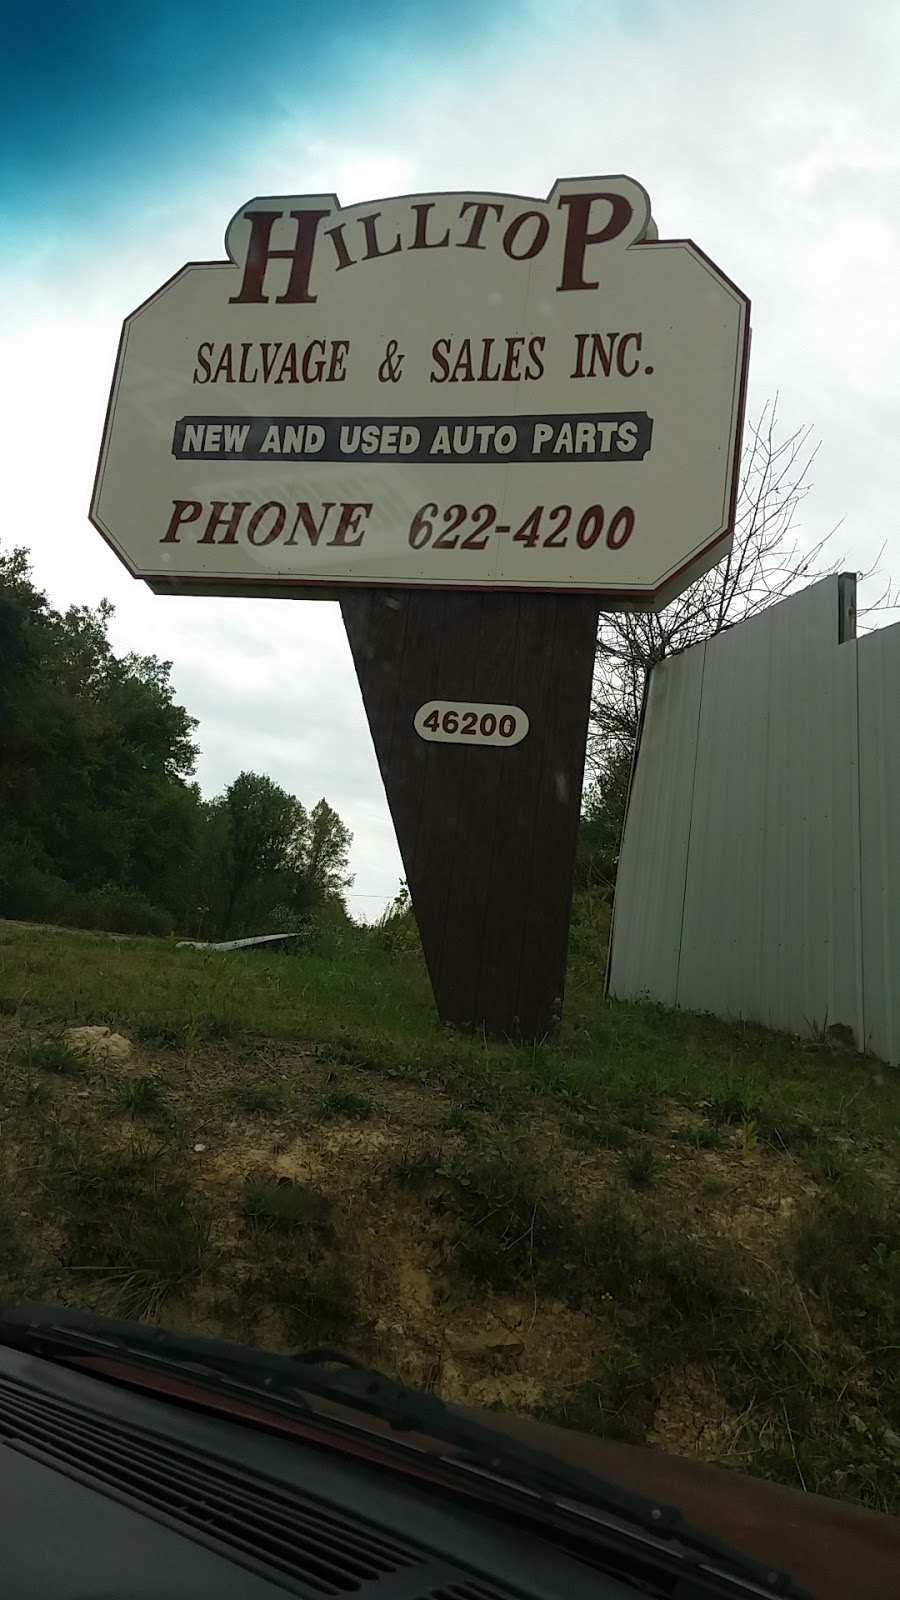 Hilltop Salvage & Sales Inc. | 46200 OH-541, Coshocton, OH 43812 | Phone: (740) 622-4200